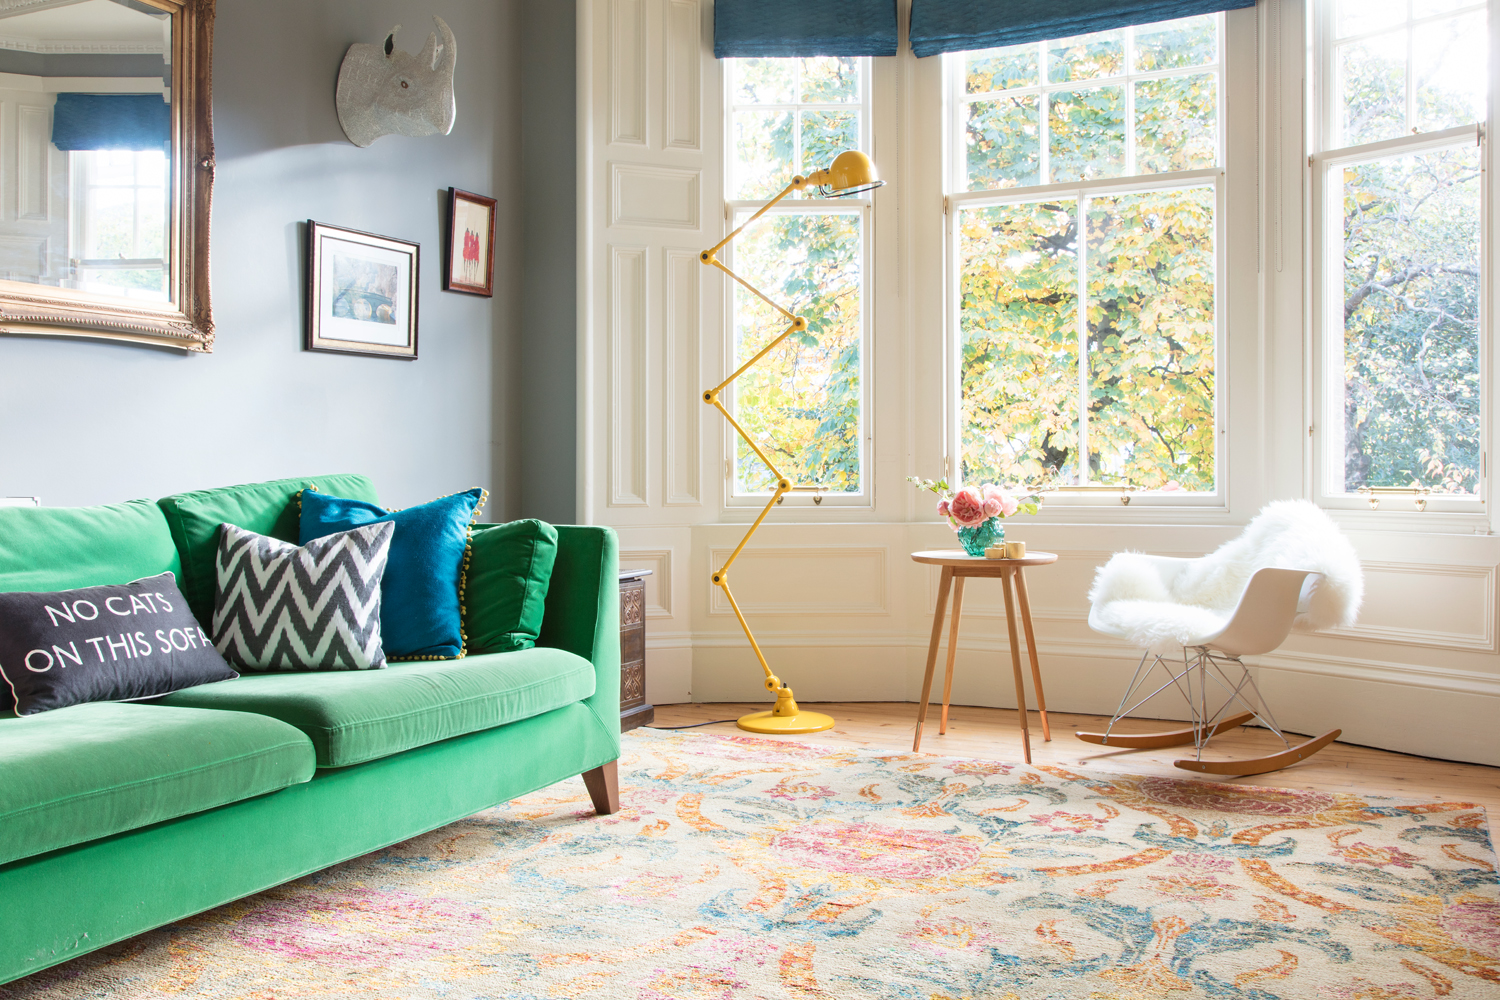 Wendy Morrison Design handknotted wool and silk Raika rug in The Pink House/Photo: Susie Lowe